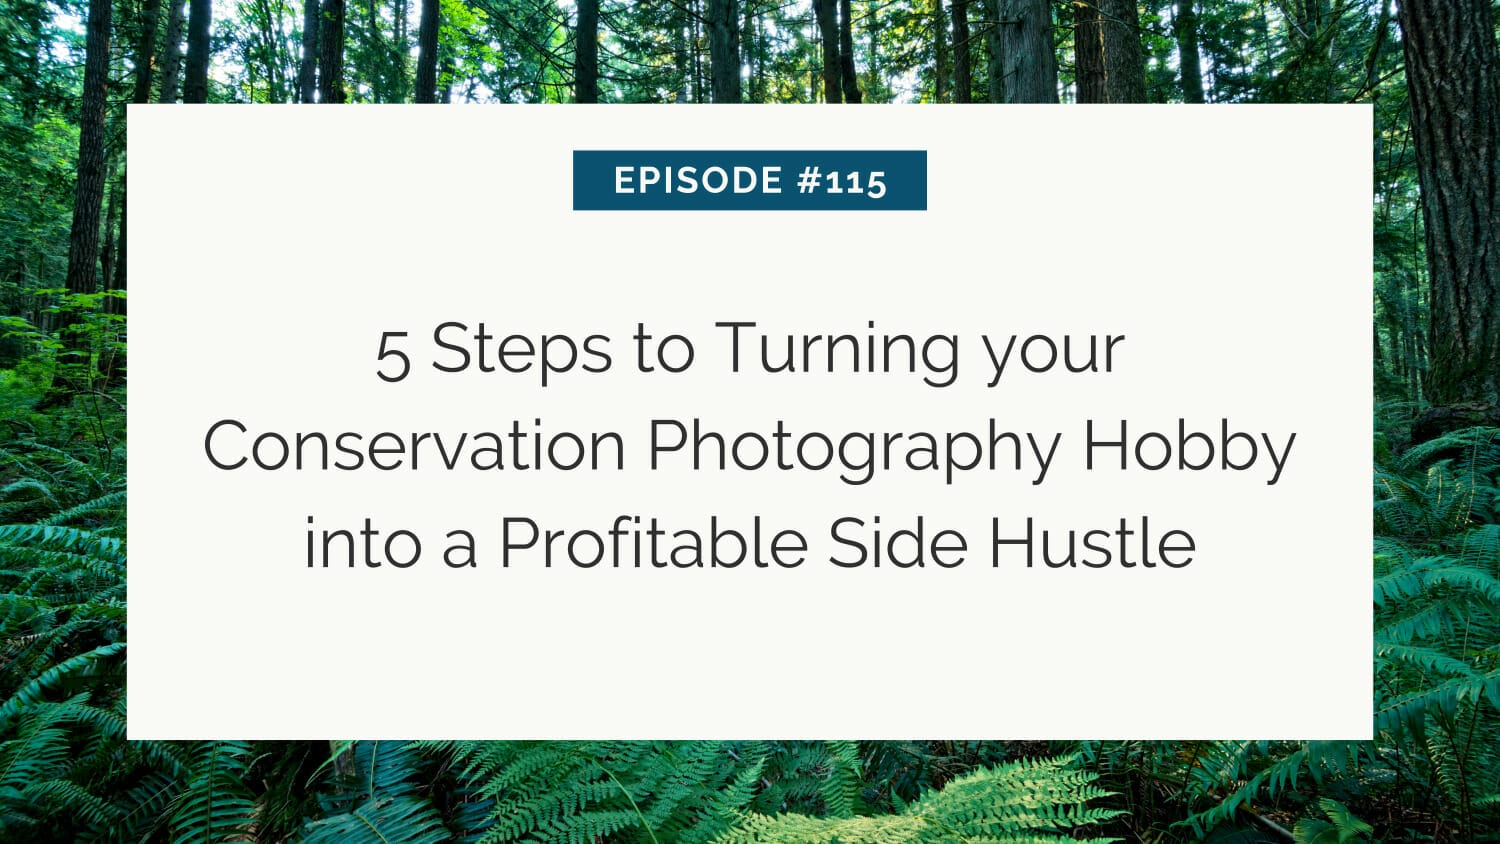 Episode #115: 5 steps to turning your conservation photography hobby into a profitable side hustle, set against a forest backdrop.